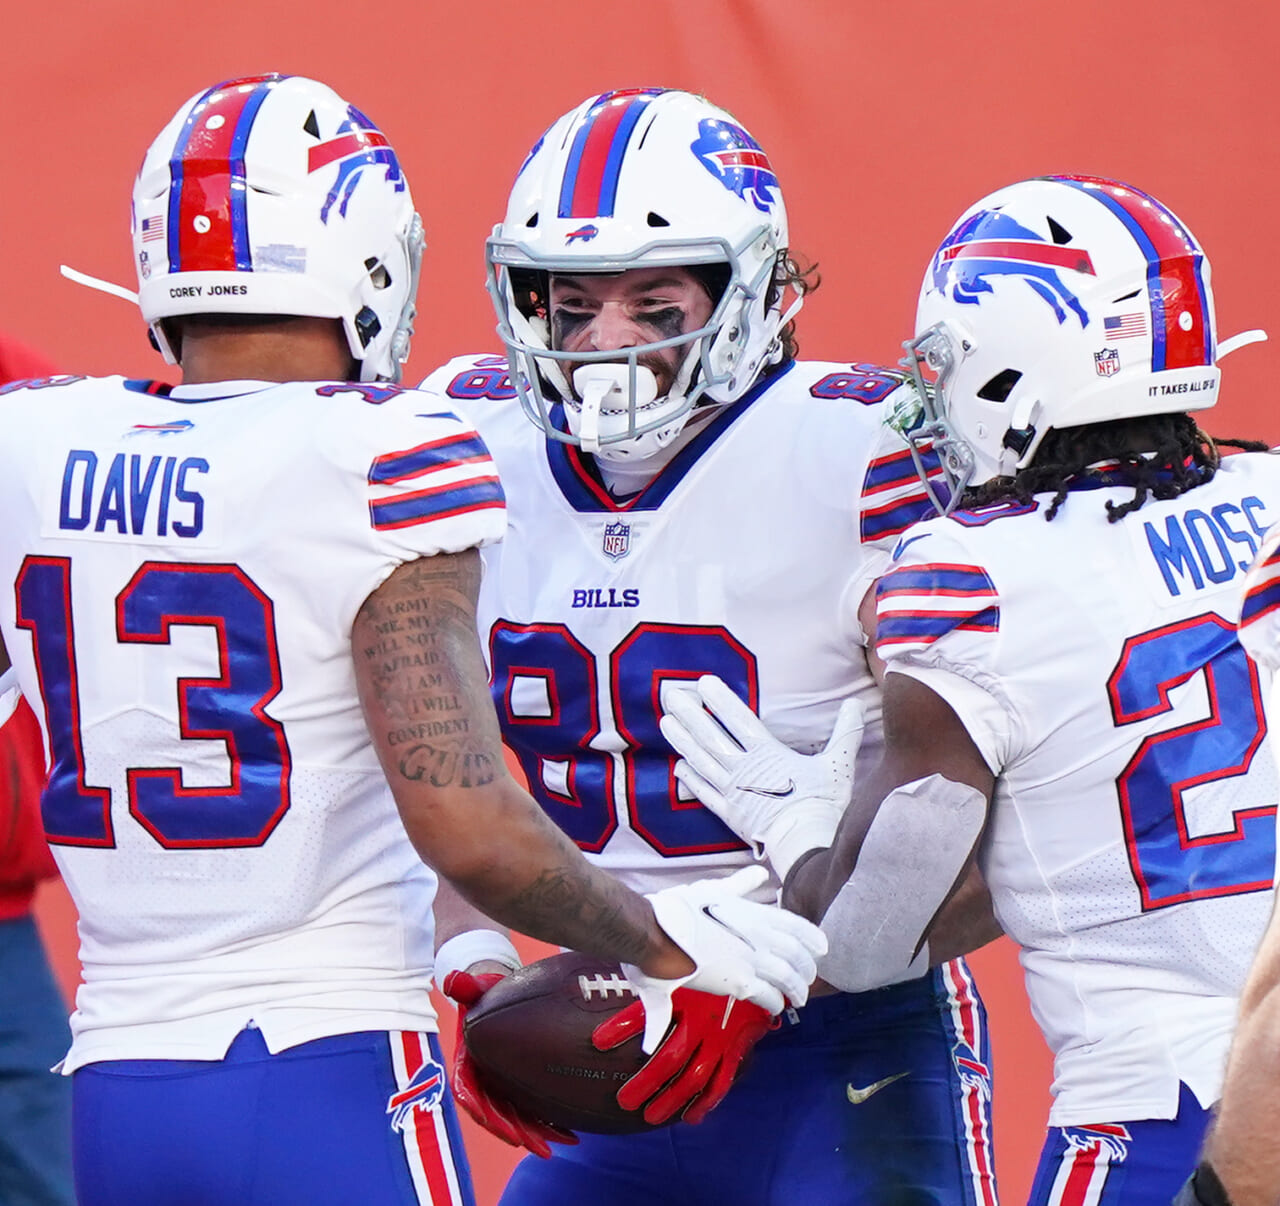 BREAKING: Buffalo Bills clinch AFC East division title